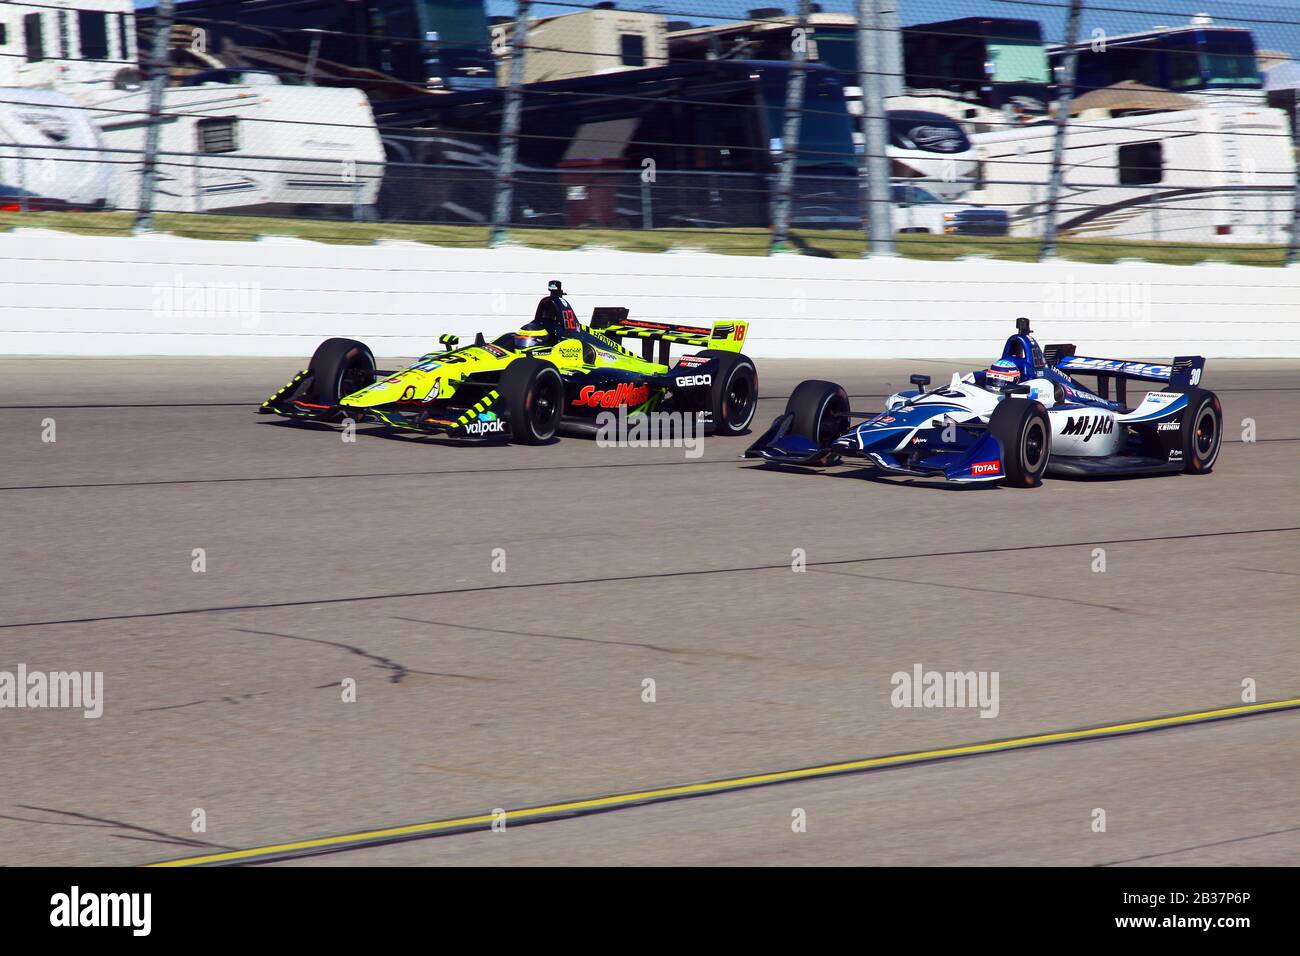 Newton Iowa, July 19, 2019: 18 Sebastien Bourdais, France, Dale Coyne Racing, on race track during practice session for the Iowa 300 Indycar race. Stock Photo